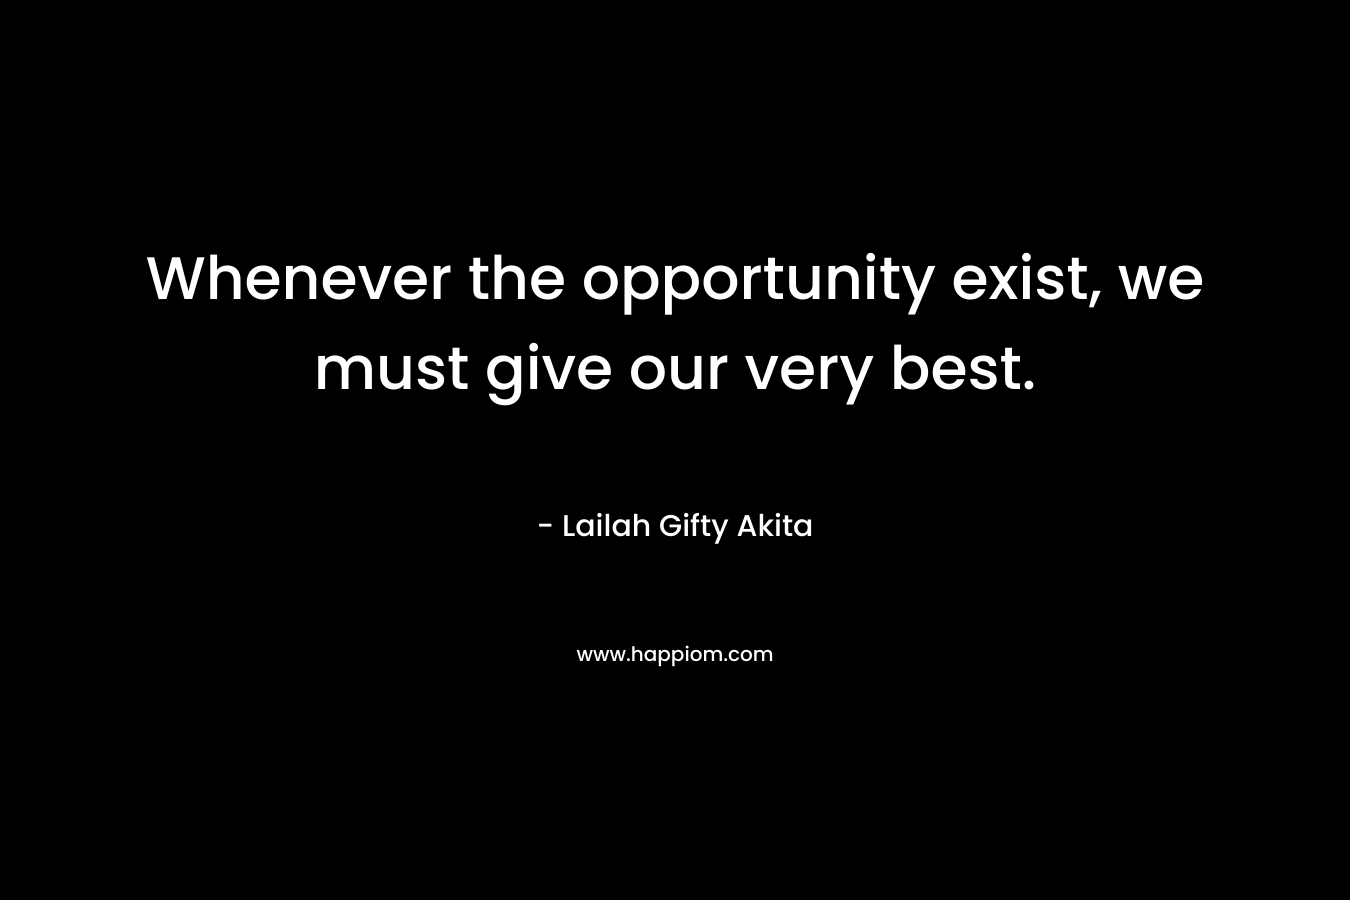 Whenever the opportunity exist, we must give our very best.